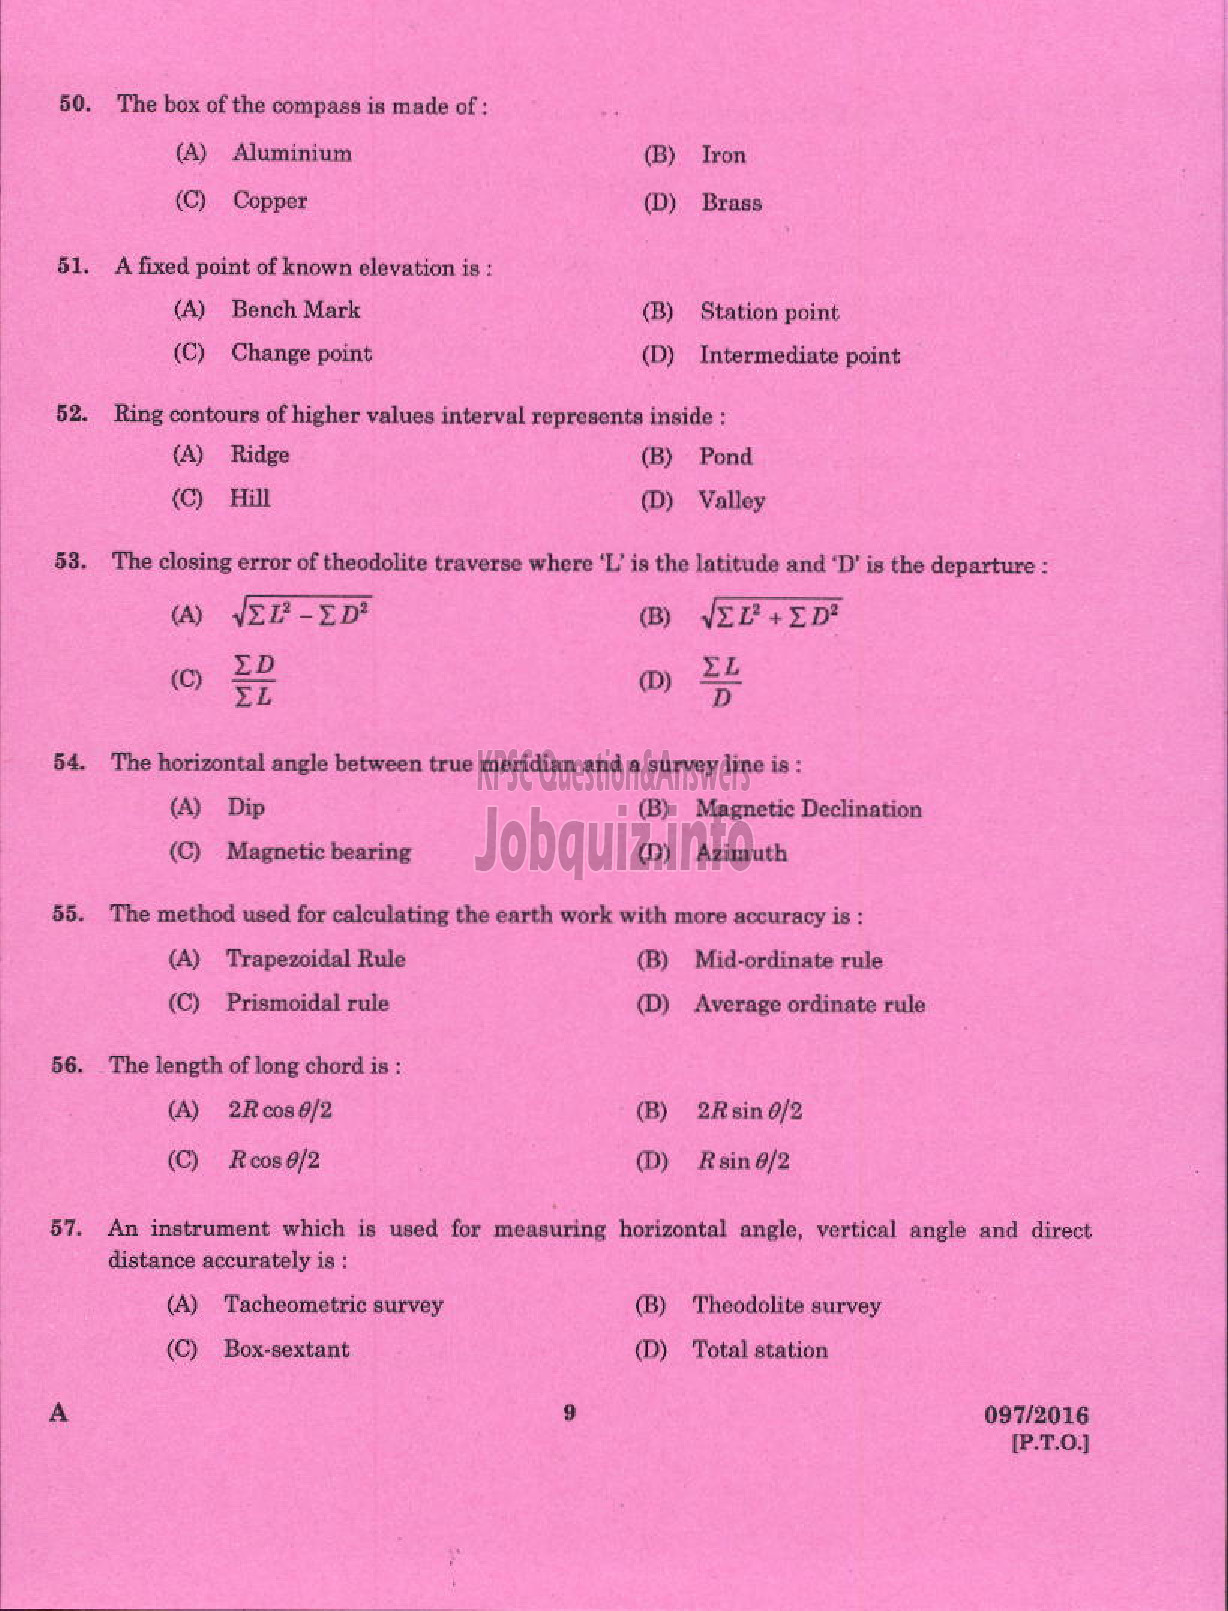 Kerala PSC Question Paper - DRAUGHTSMAN GR II SURVEY AND LAND RECORDS-7